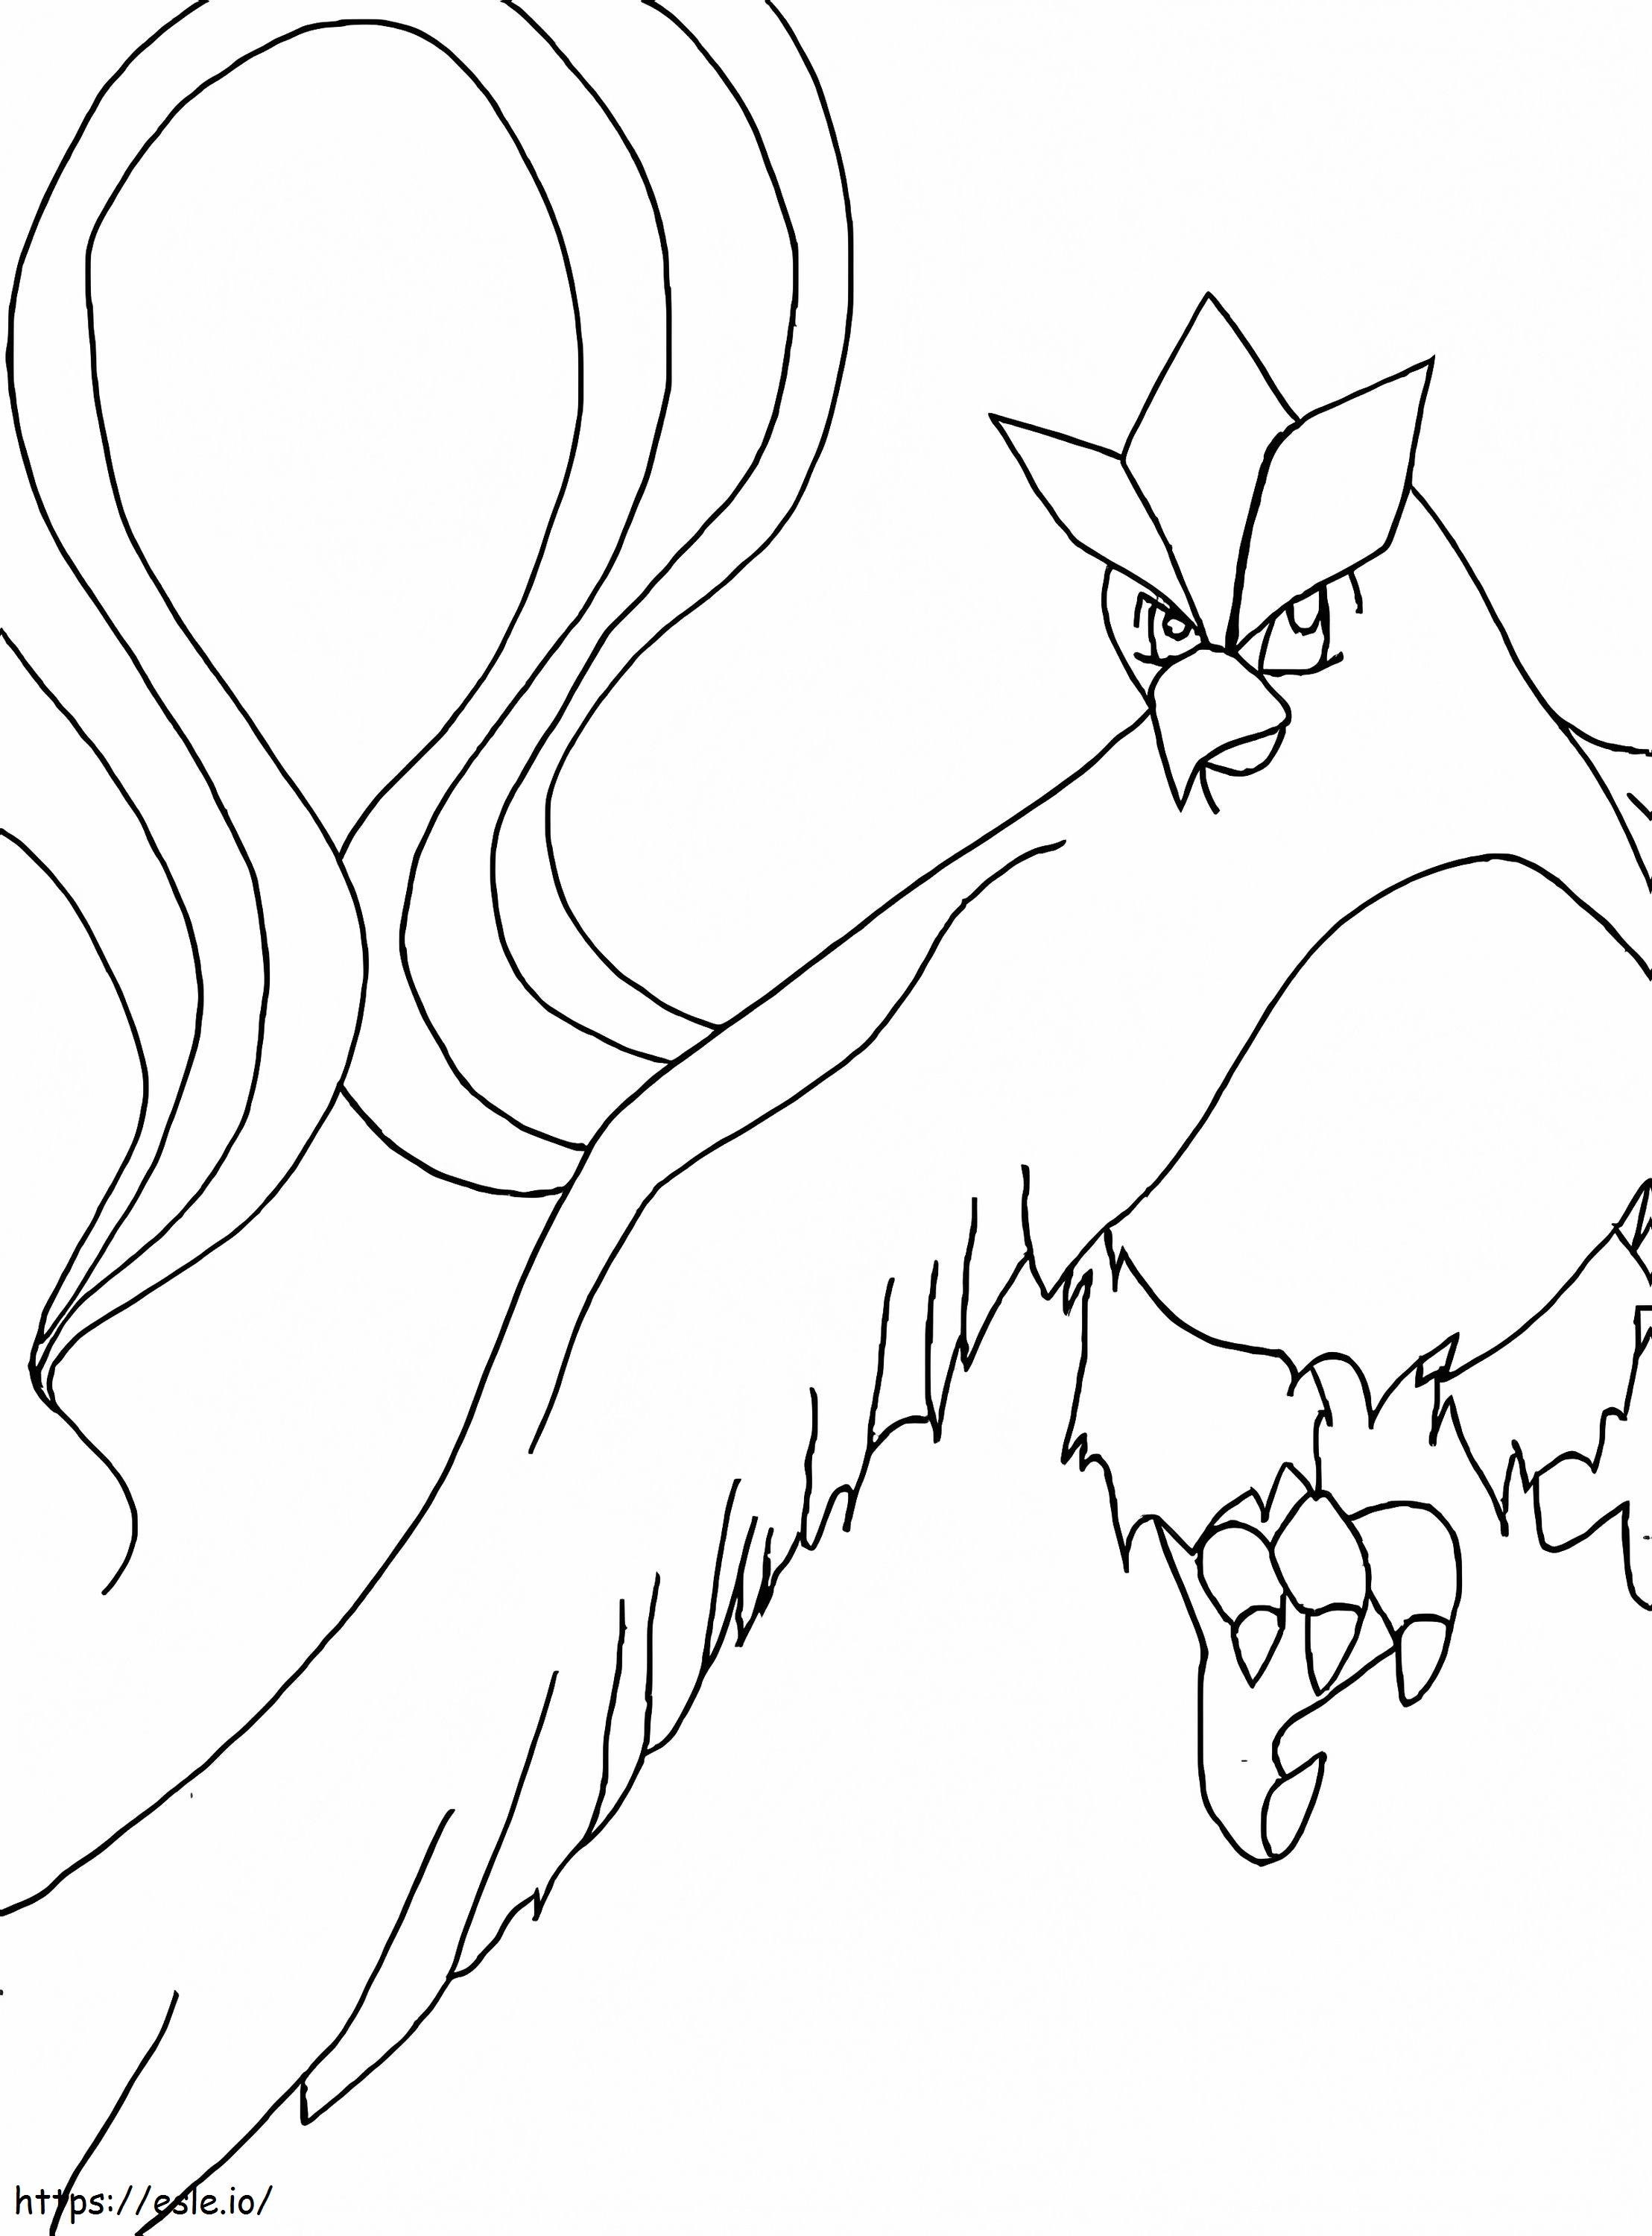 Articuno coloring page  Free Printable Coloring Pages